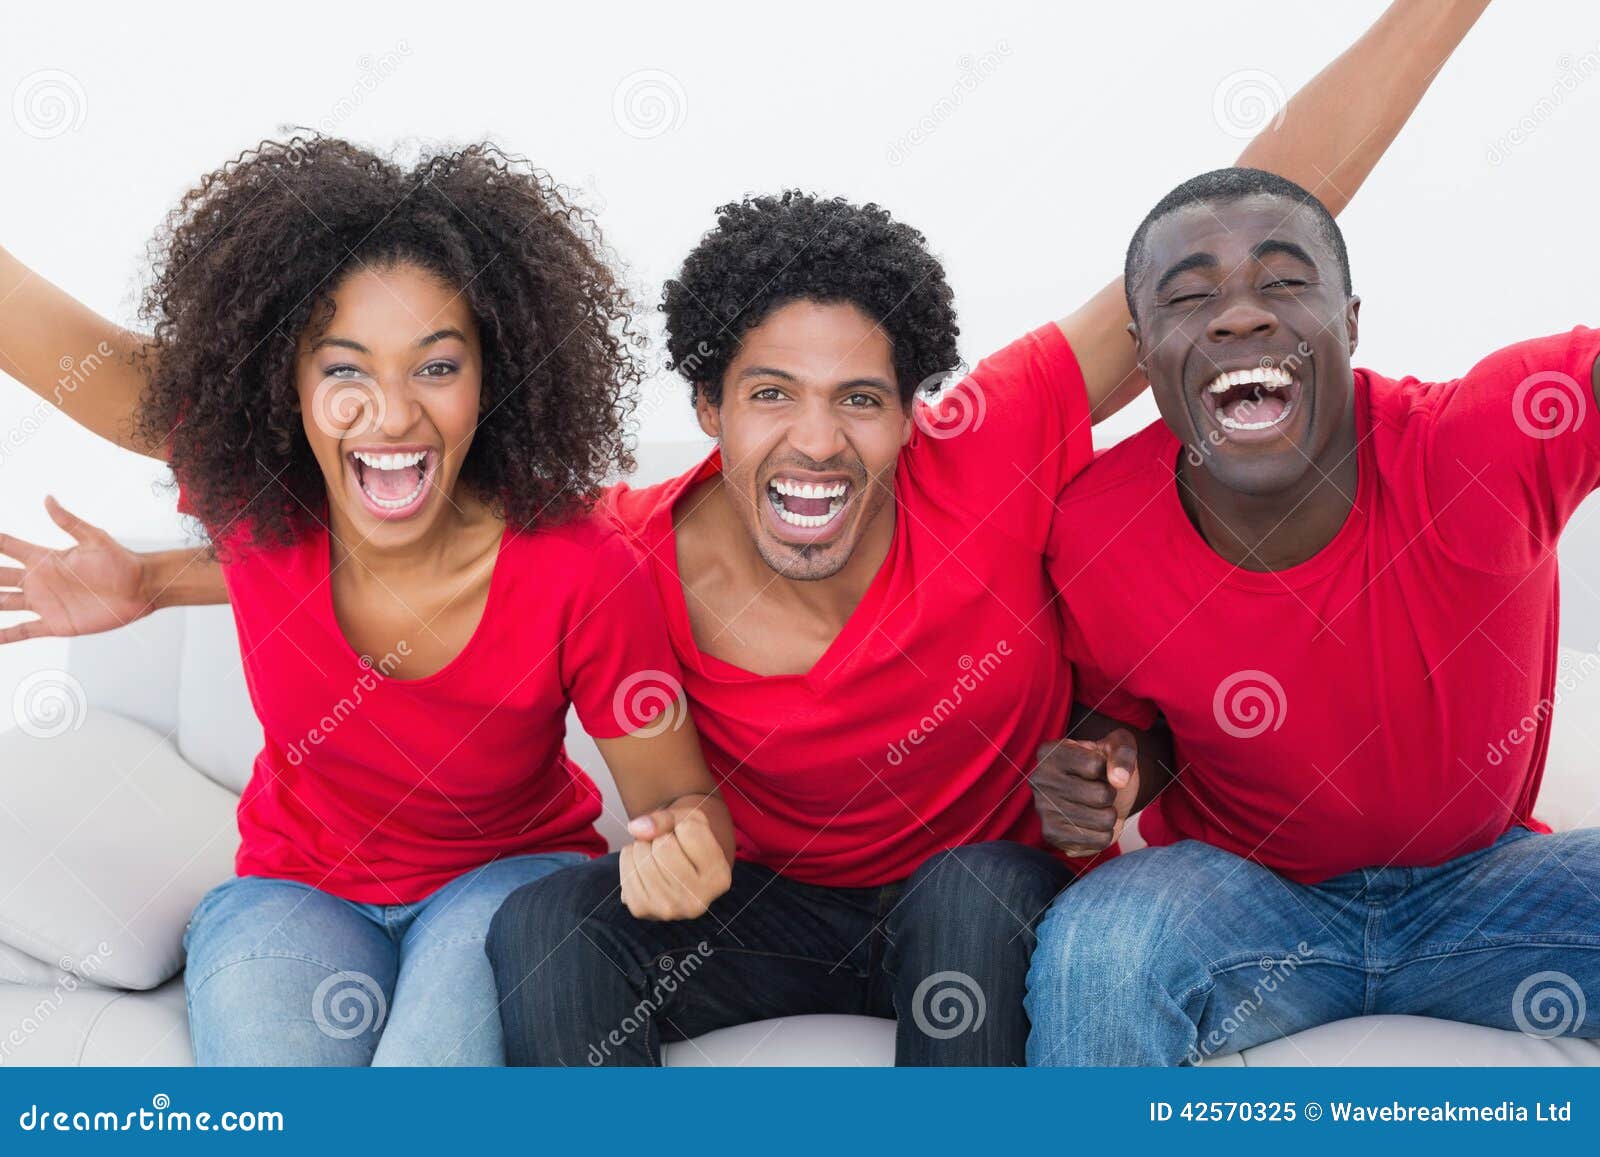 Football Fans in Red Sitting on Couch Cheering Stock Image - Image of ...